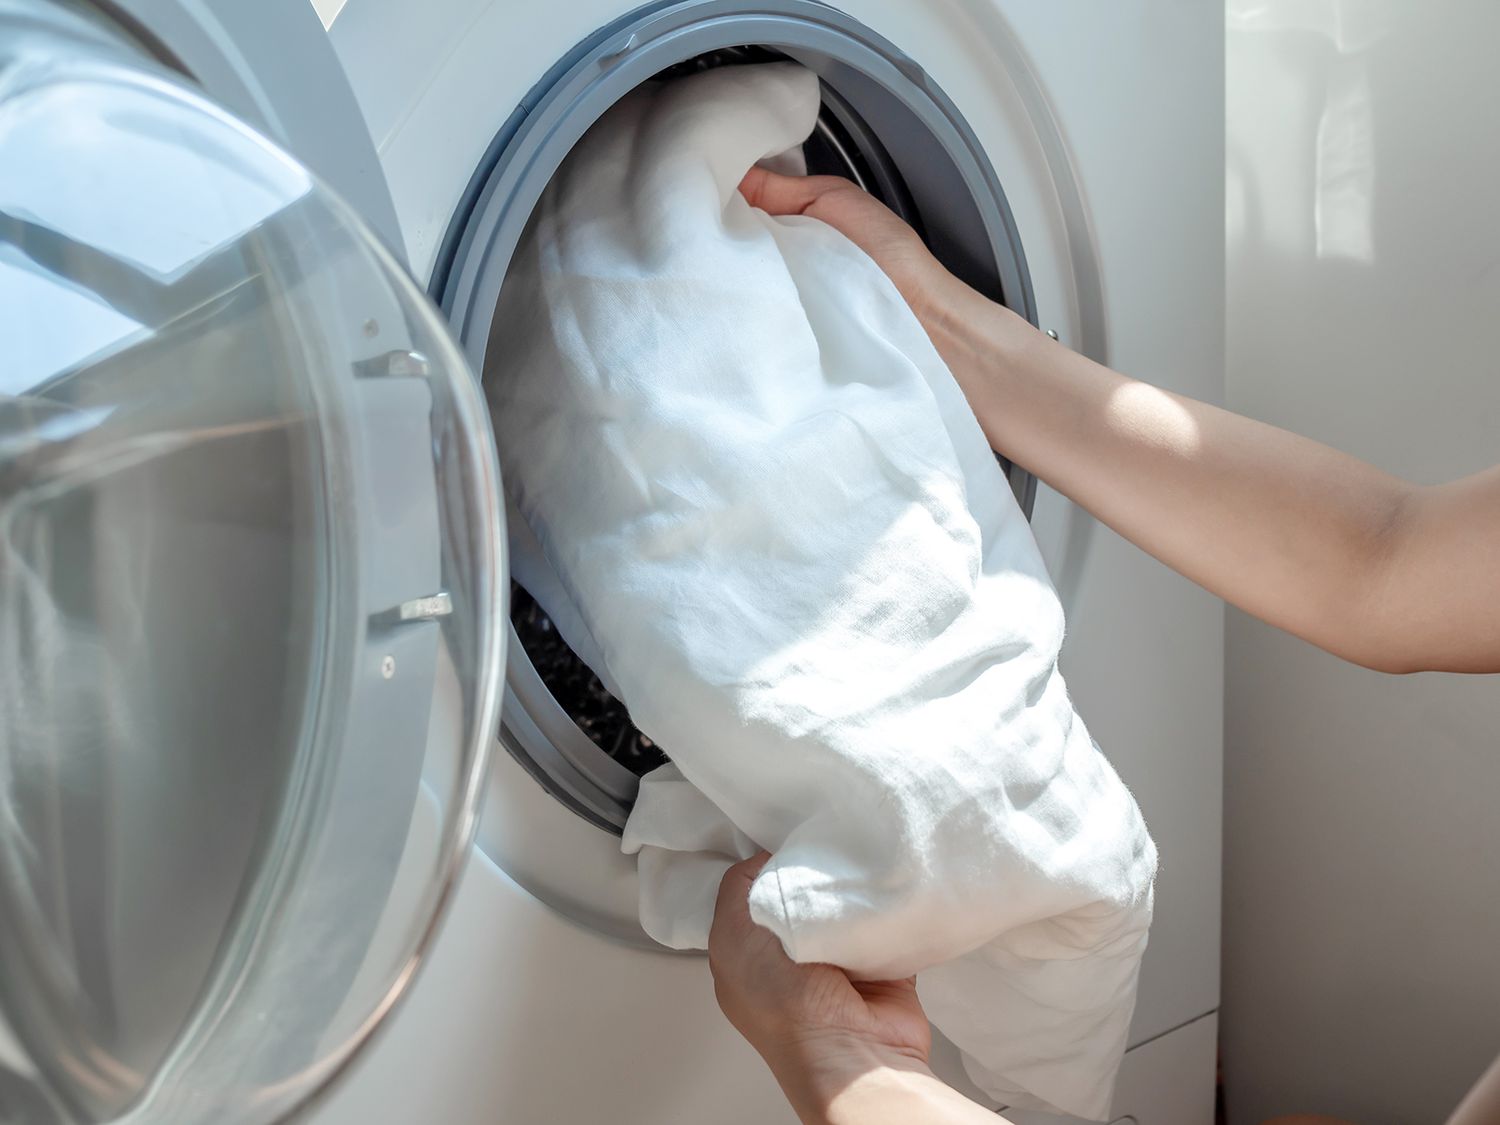 close up of person doing laundry loading white sheet into washer